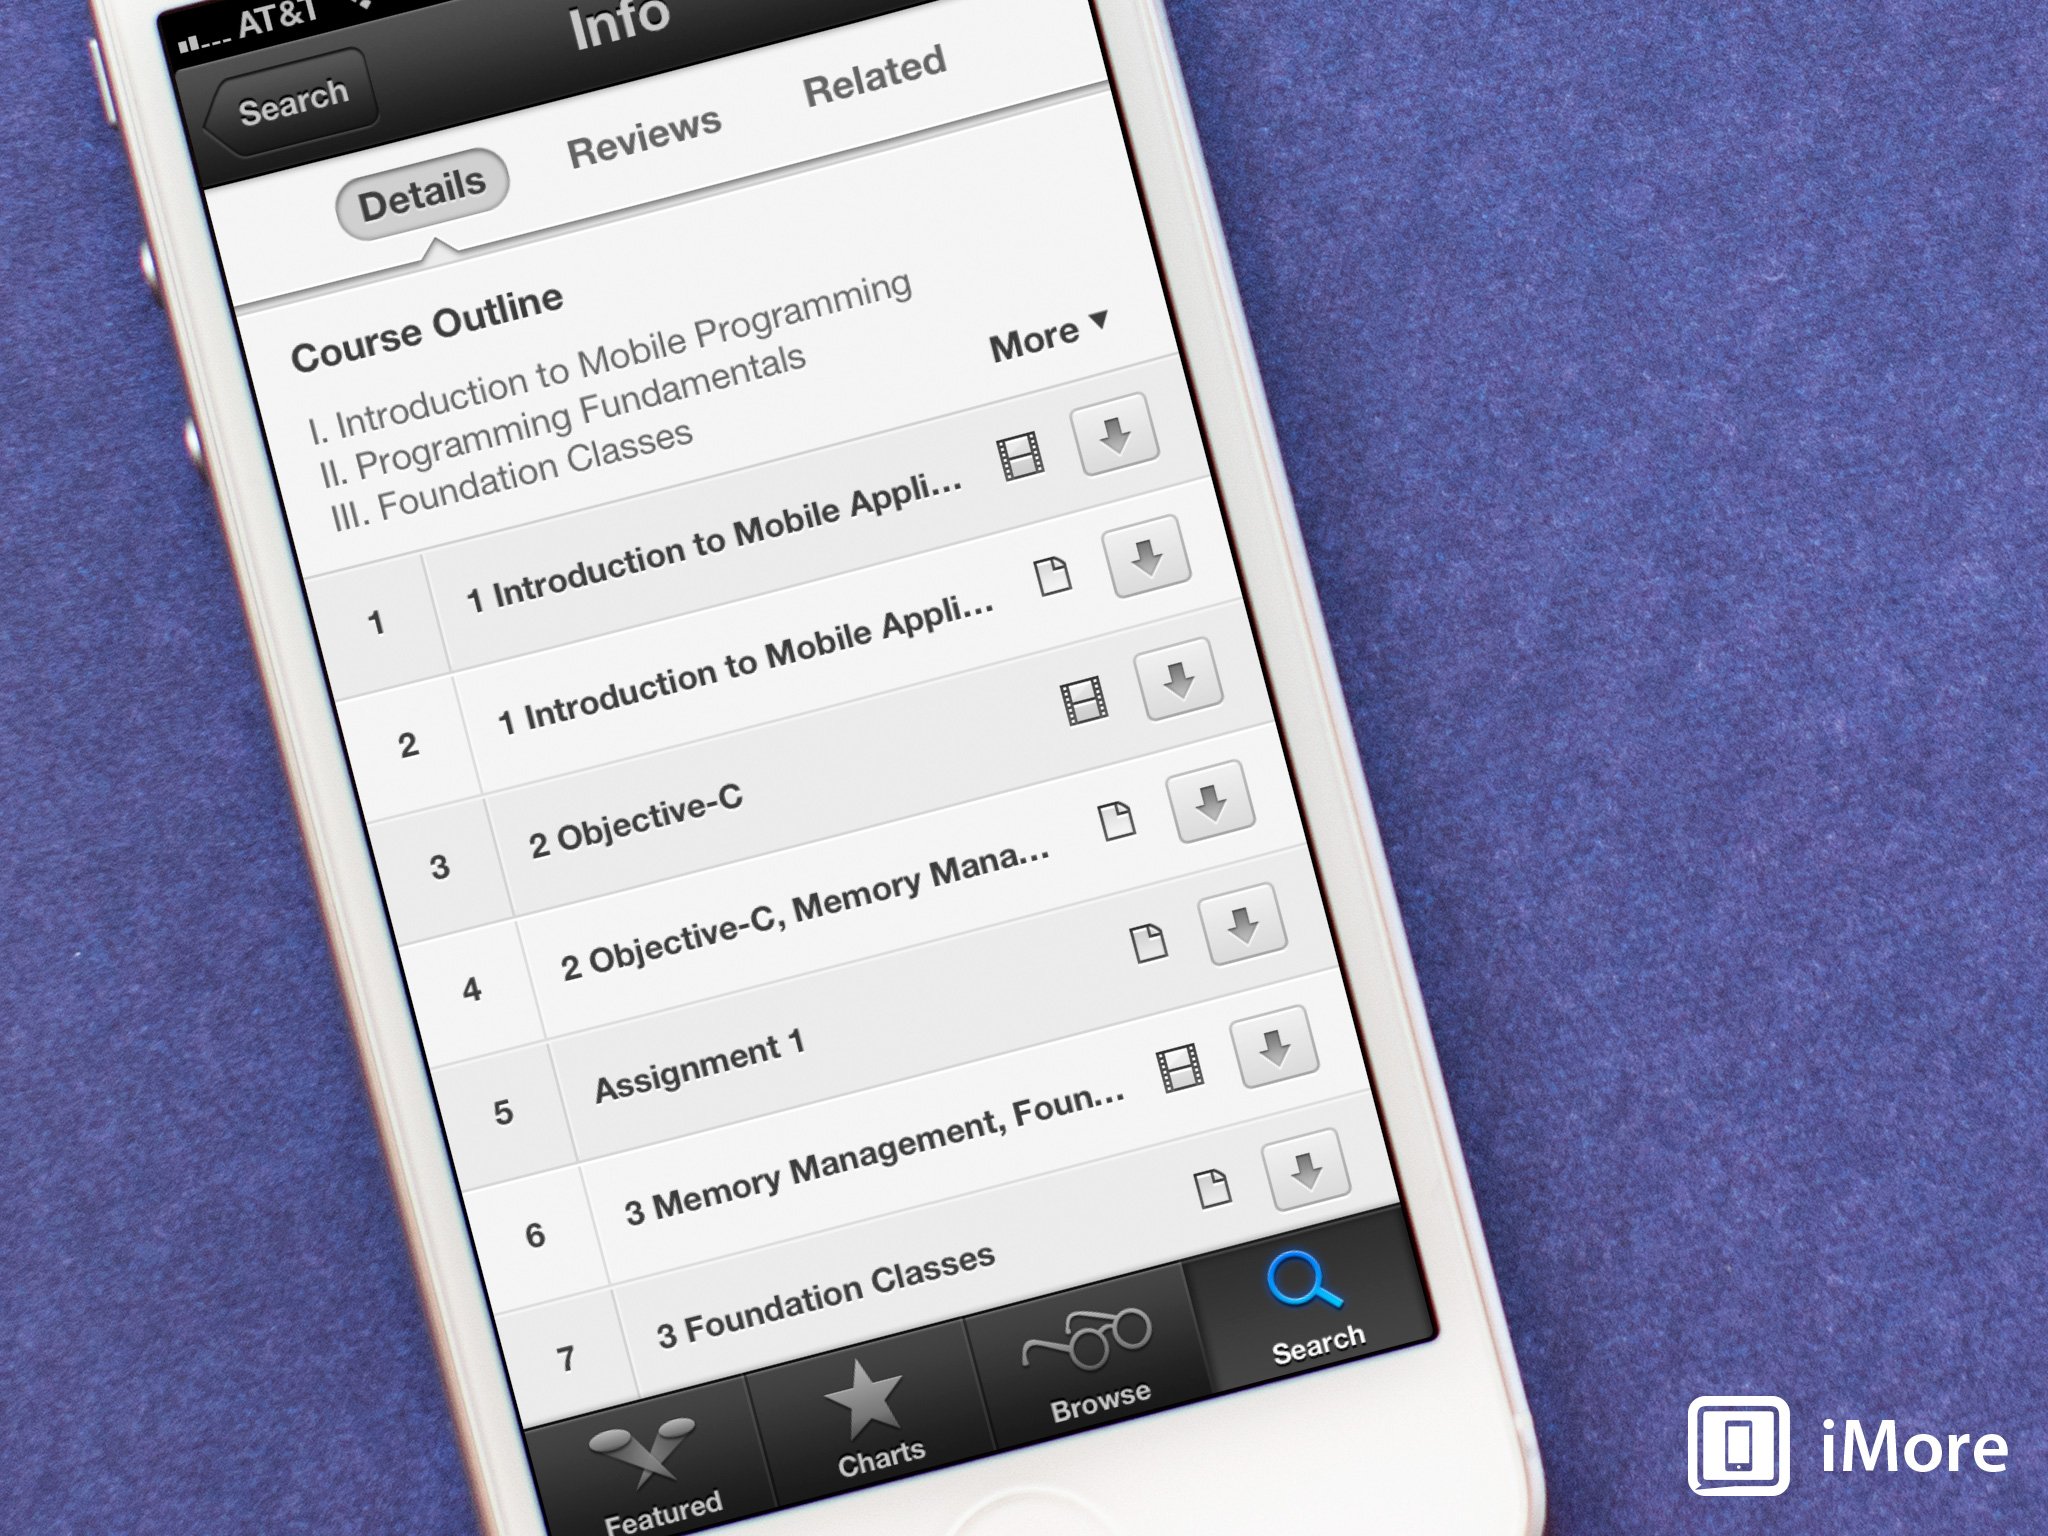 How to download iTunes U assignments and course material to iBooks for iPhone and iPad